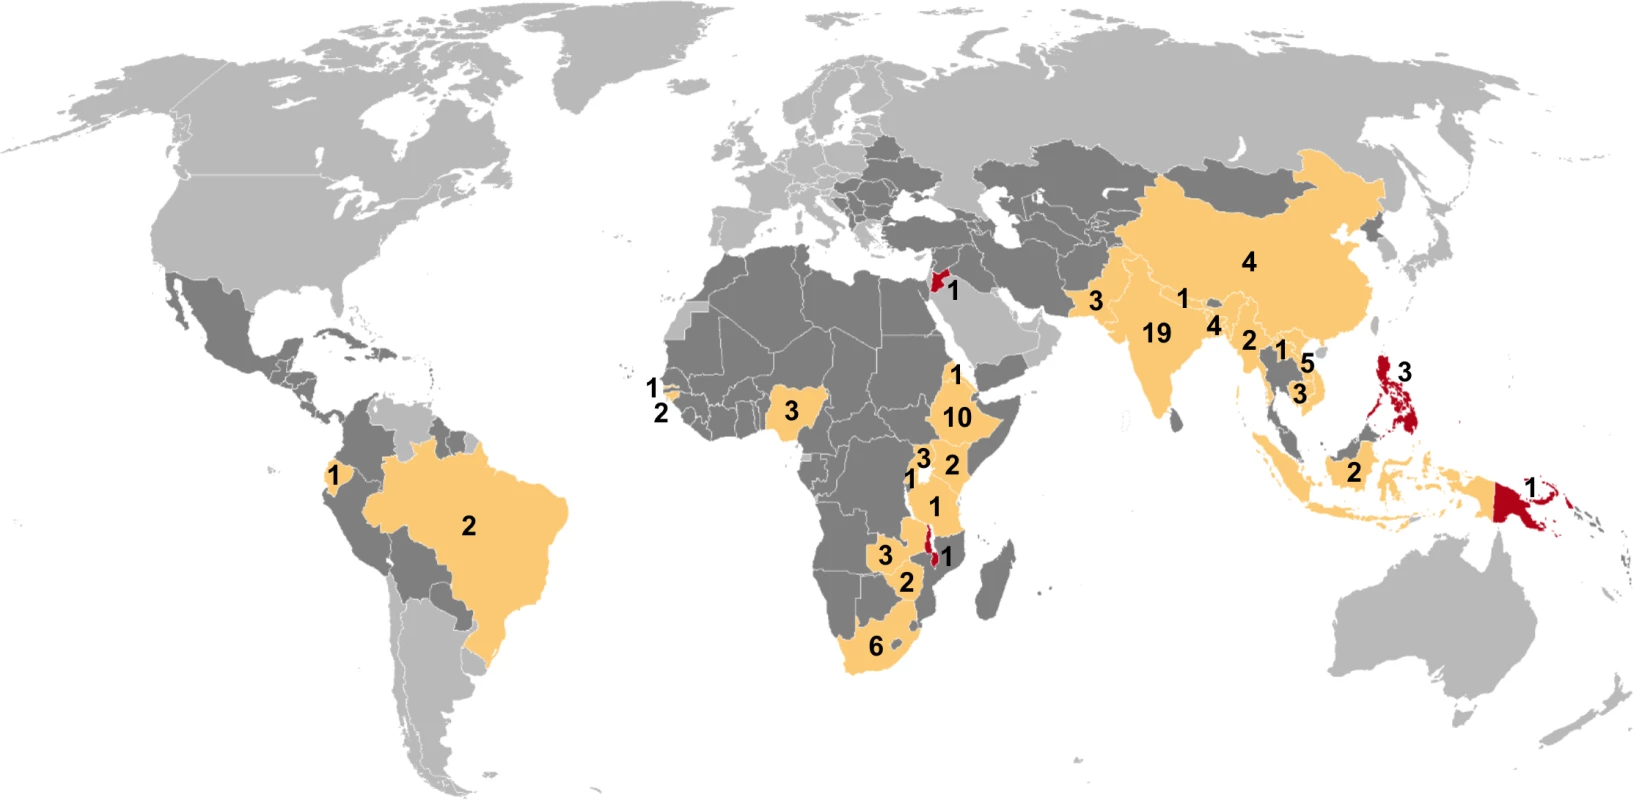 Global map showing countries in which prevalence surveys have been conducted.